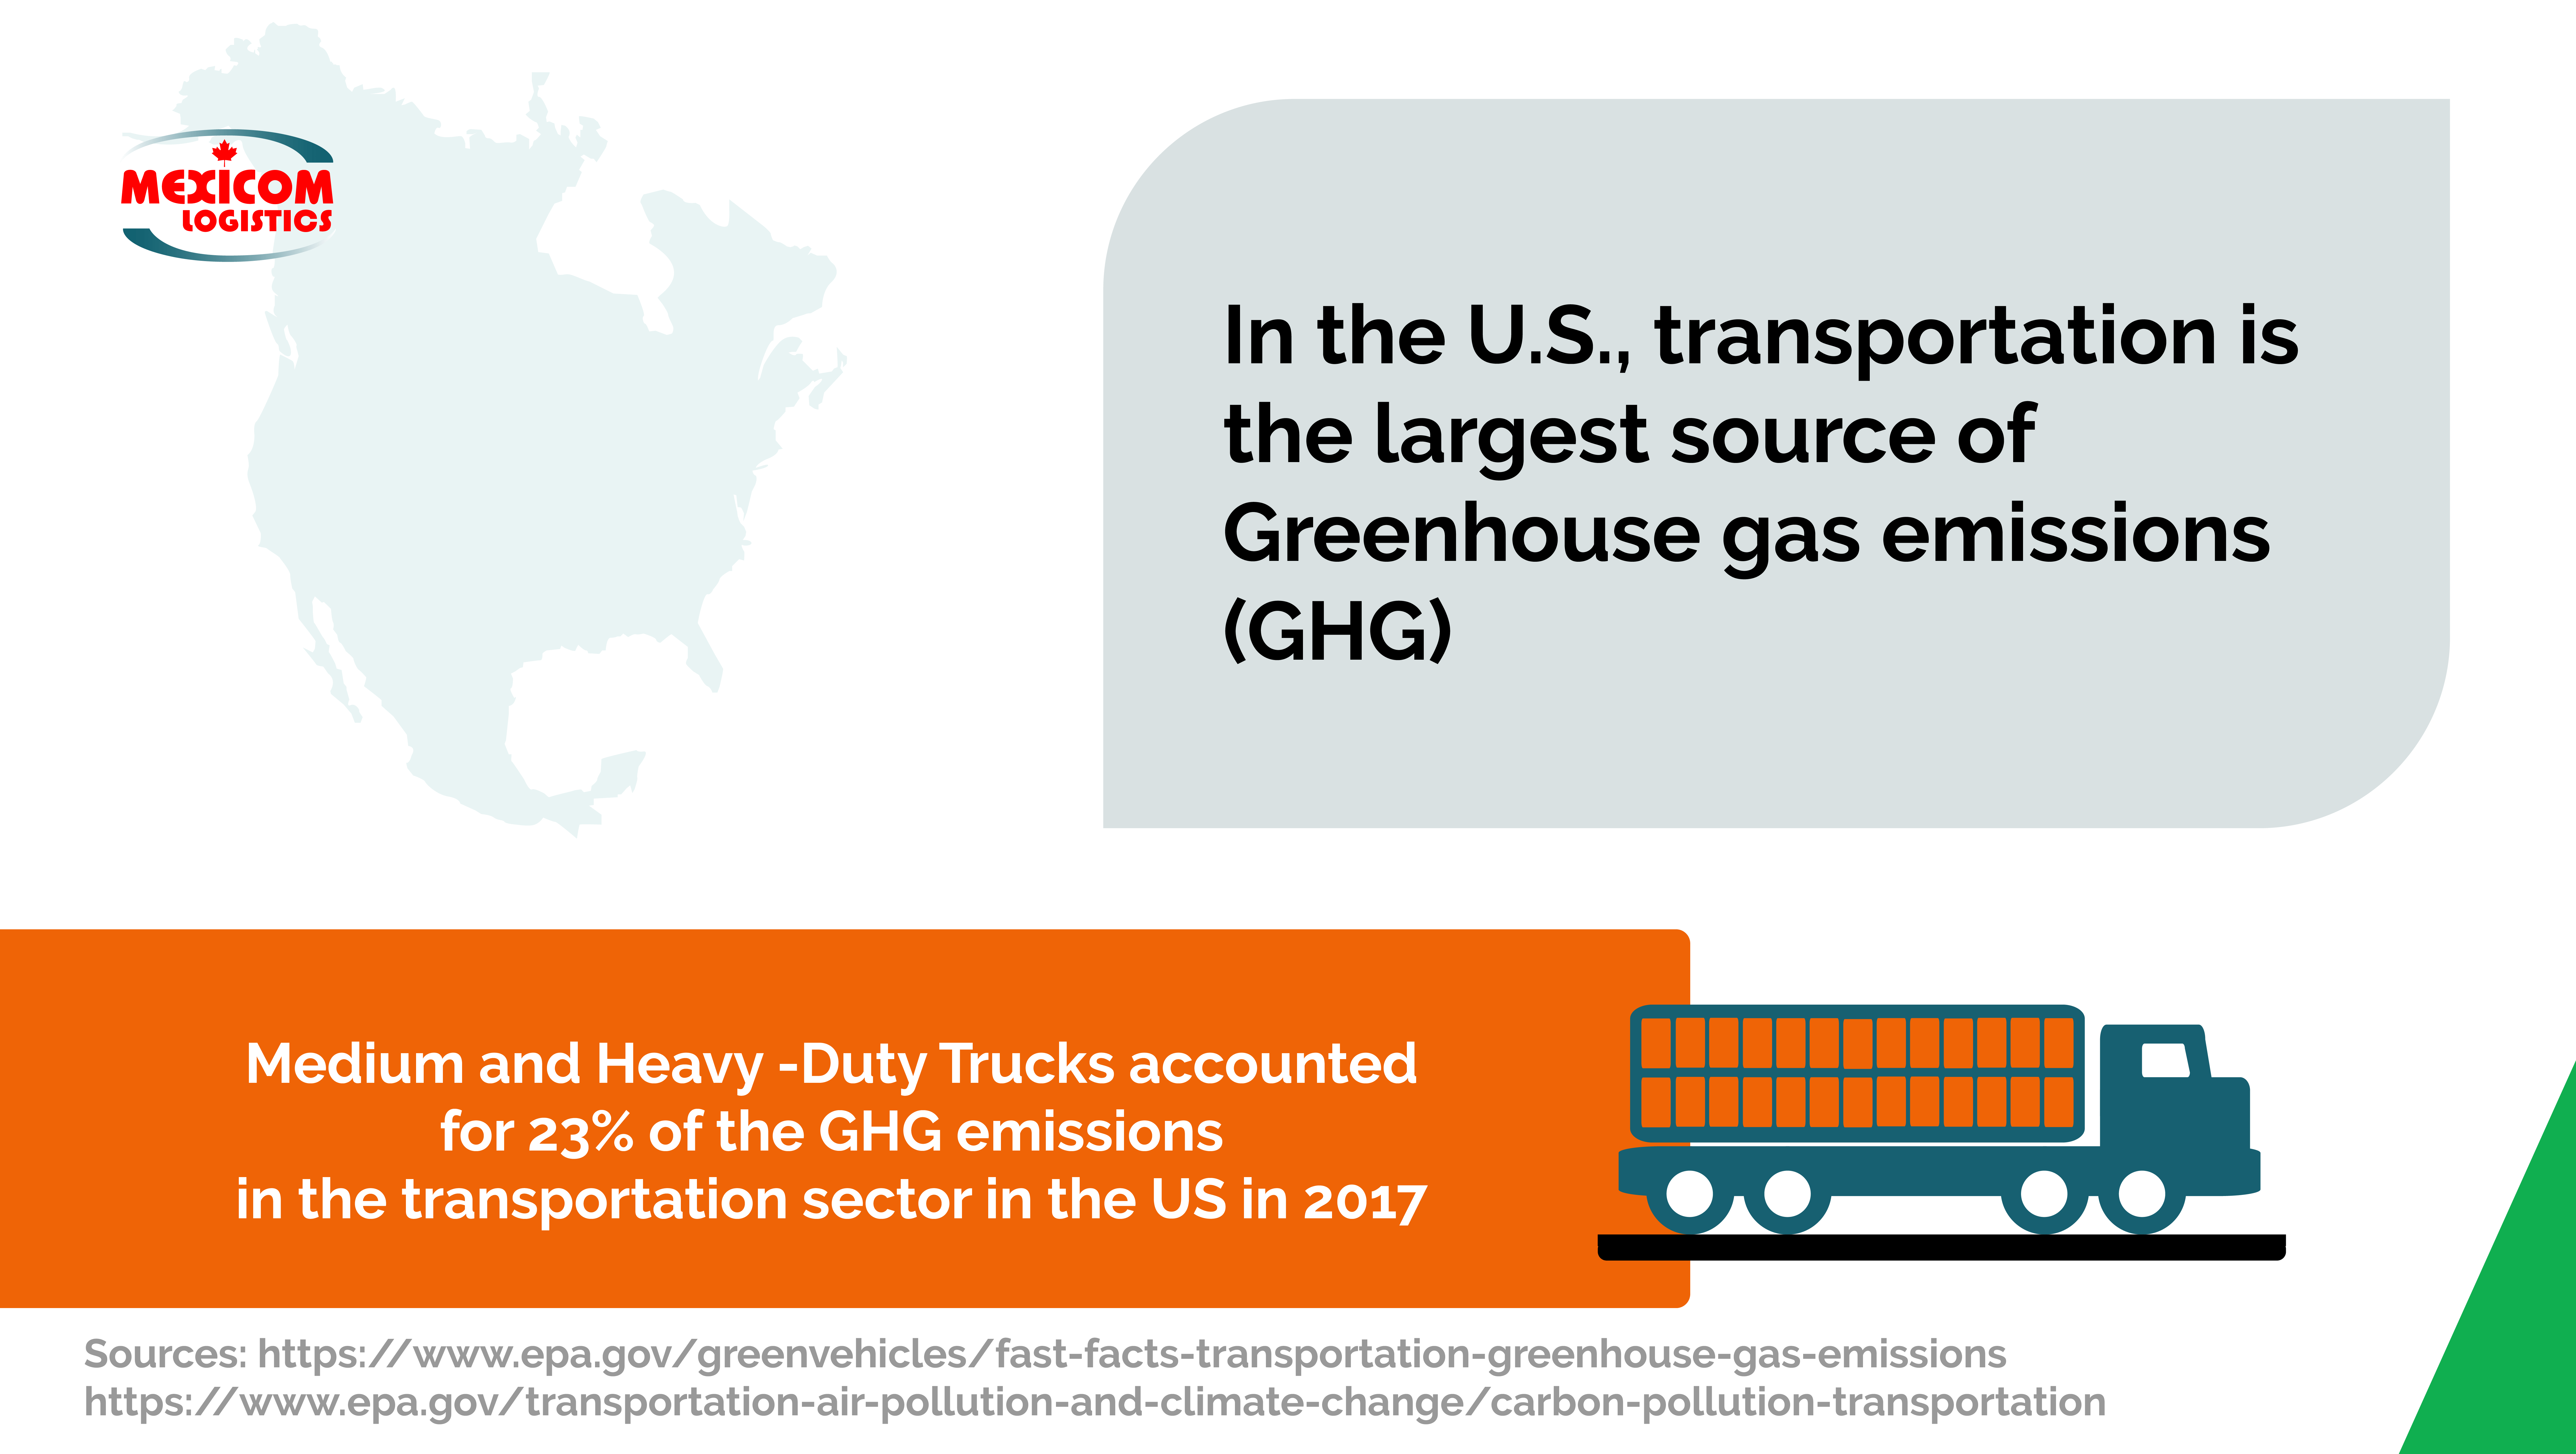 greenhouse gases emissions freight transport in the USA